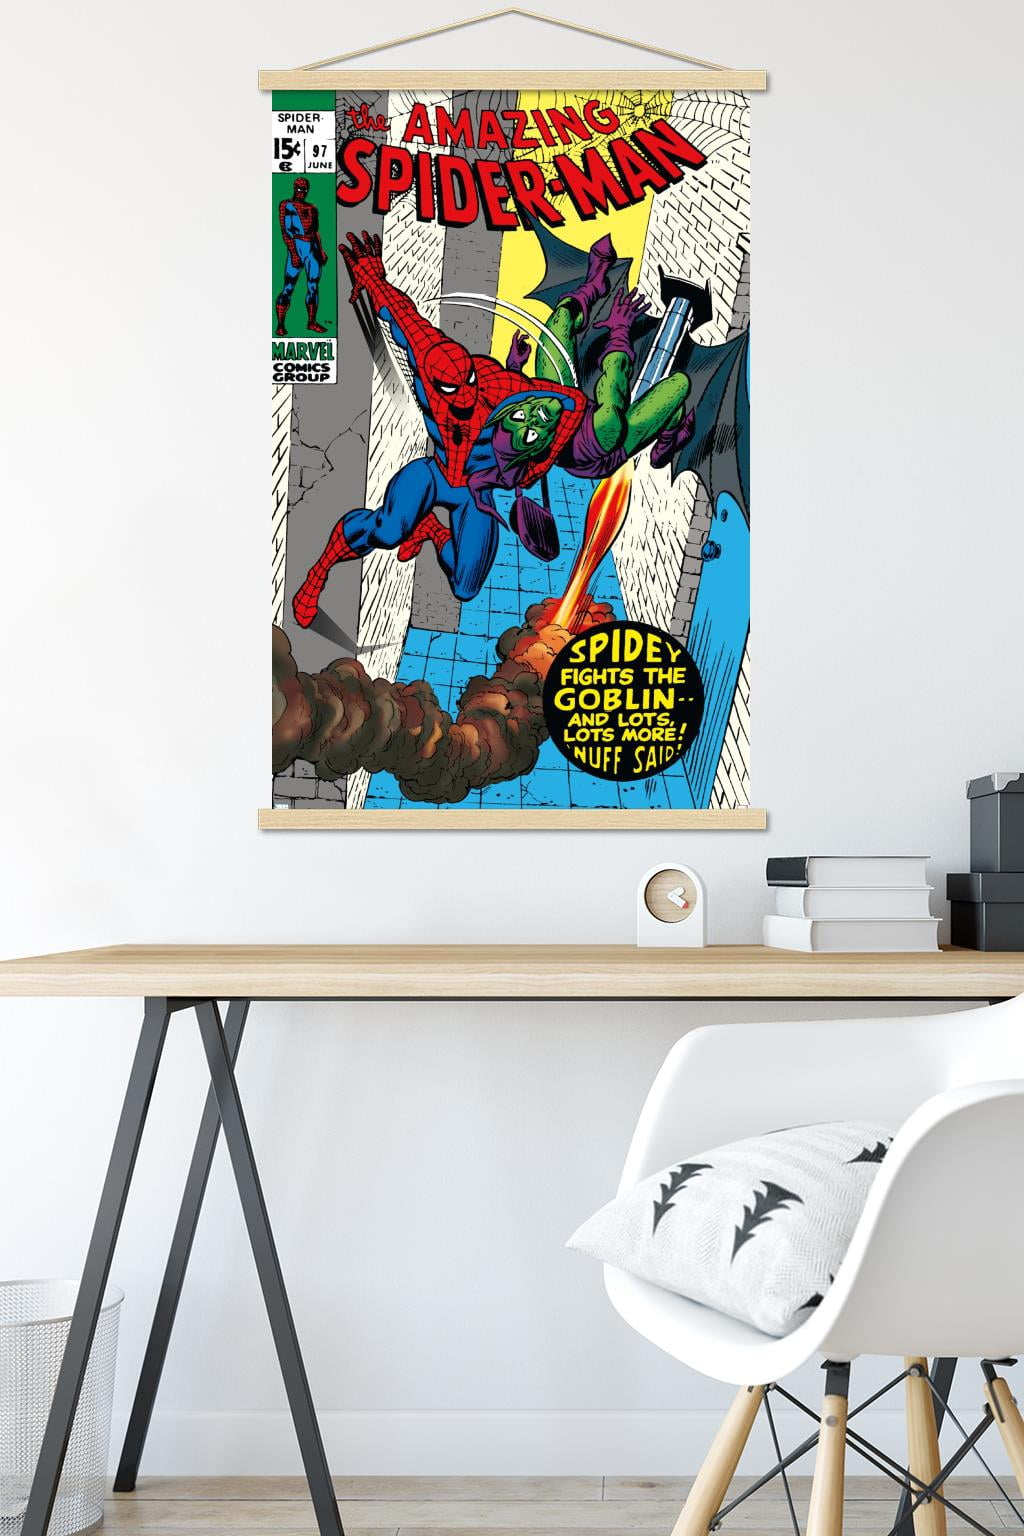 THE AMAZING SPIDER MAN 2 GIANT wall Art Poster A1,A2,A3,A4 SPID03 kids  bedroom